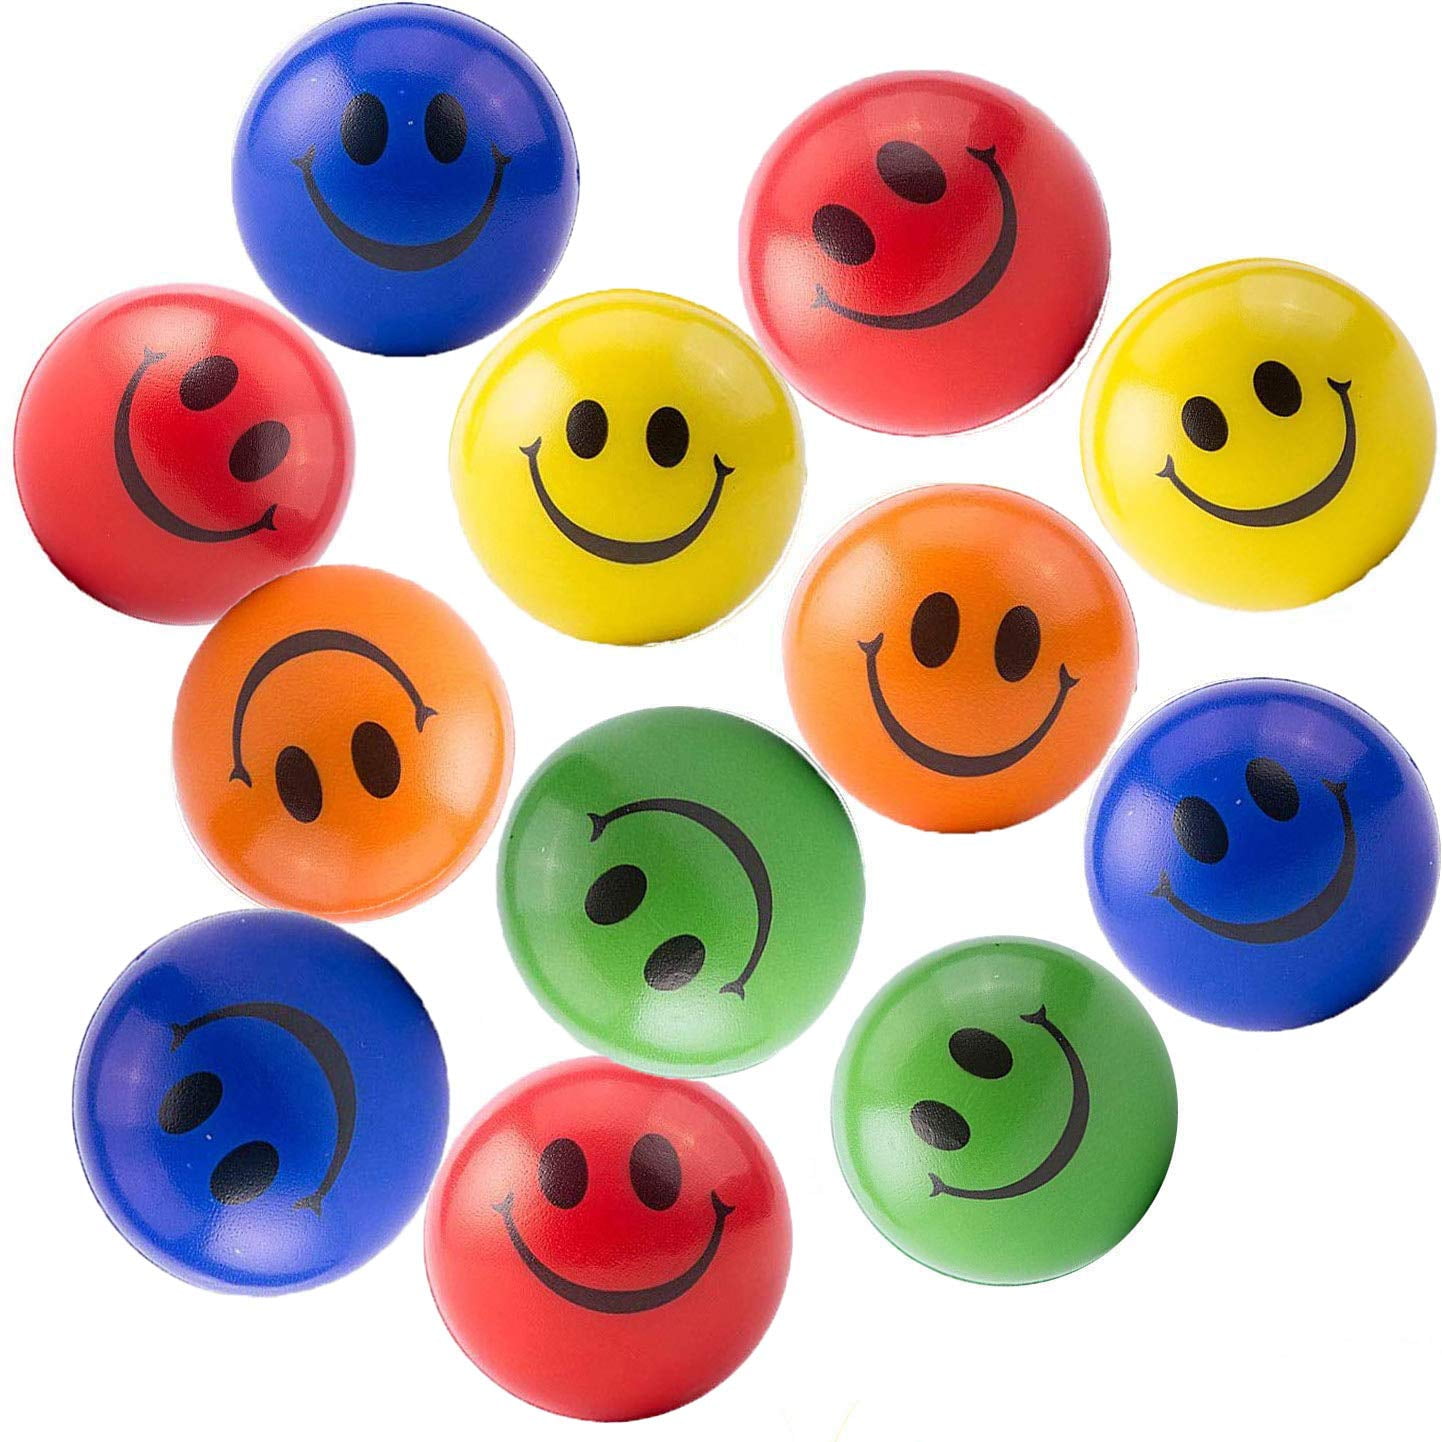 12 SMILE SMILEY FACE STRESS RELIEF BALLS 2" FOAM HAND THERAPY SQUEEZE TOY BALL 